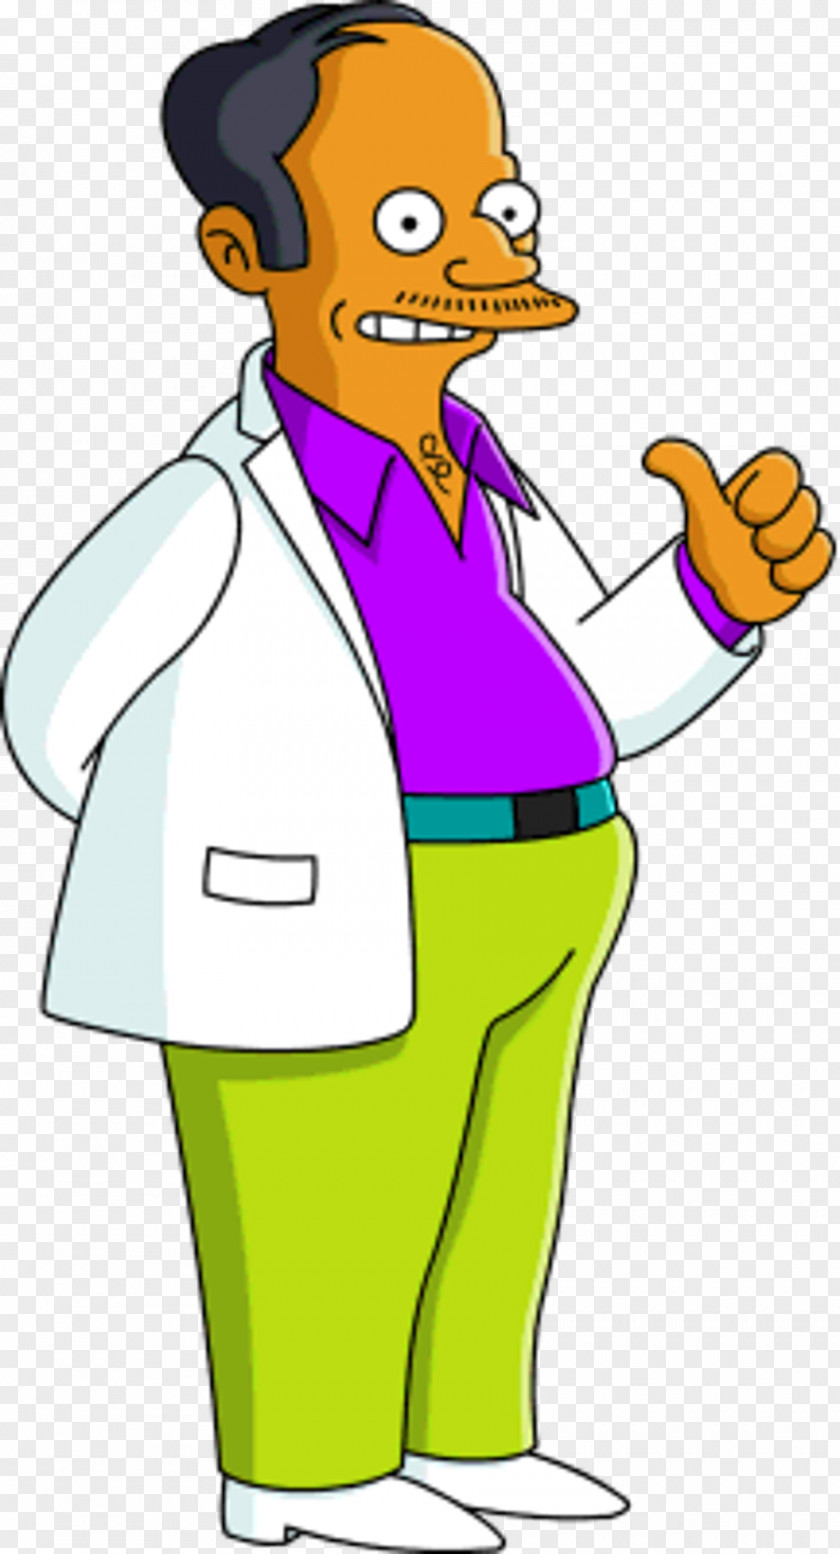 Simpsons Apu Nahasapeemapetilon The Simpsons: Tapped Out Nelson Muntz Famille Sanjay PNG